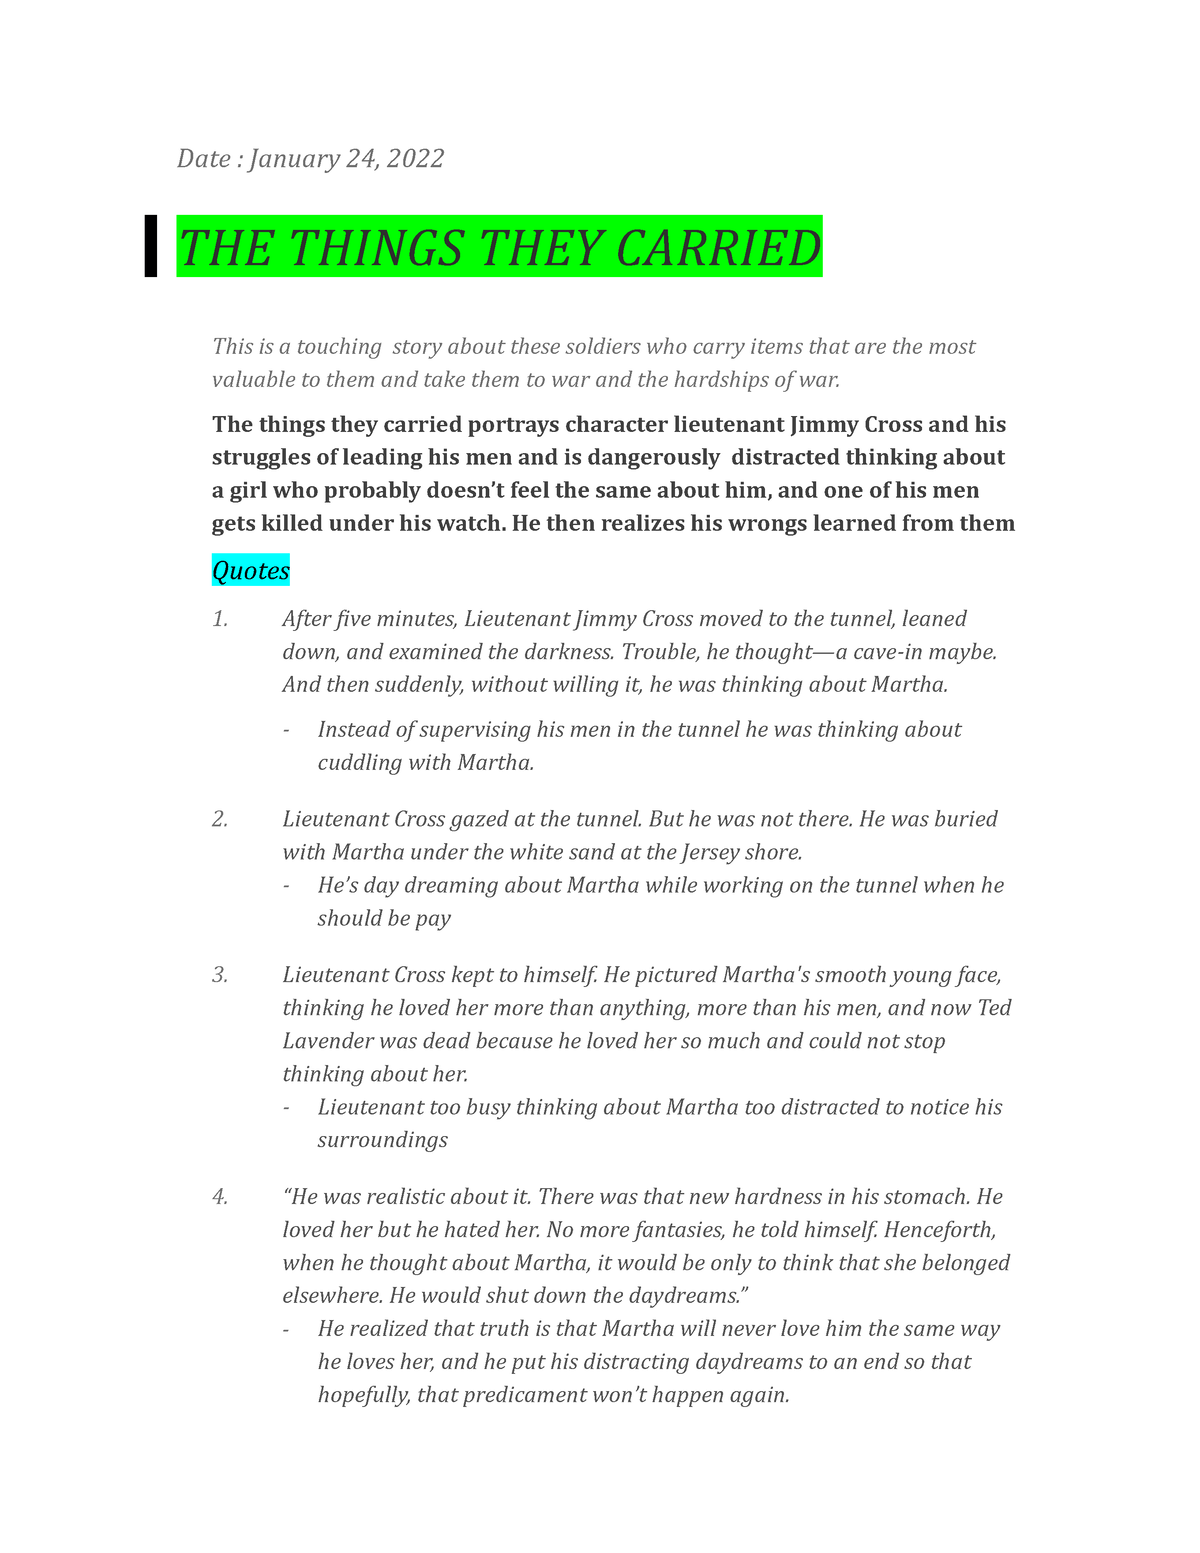 the things they carried essay introduction